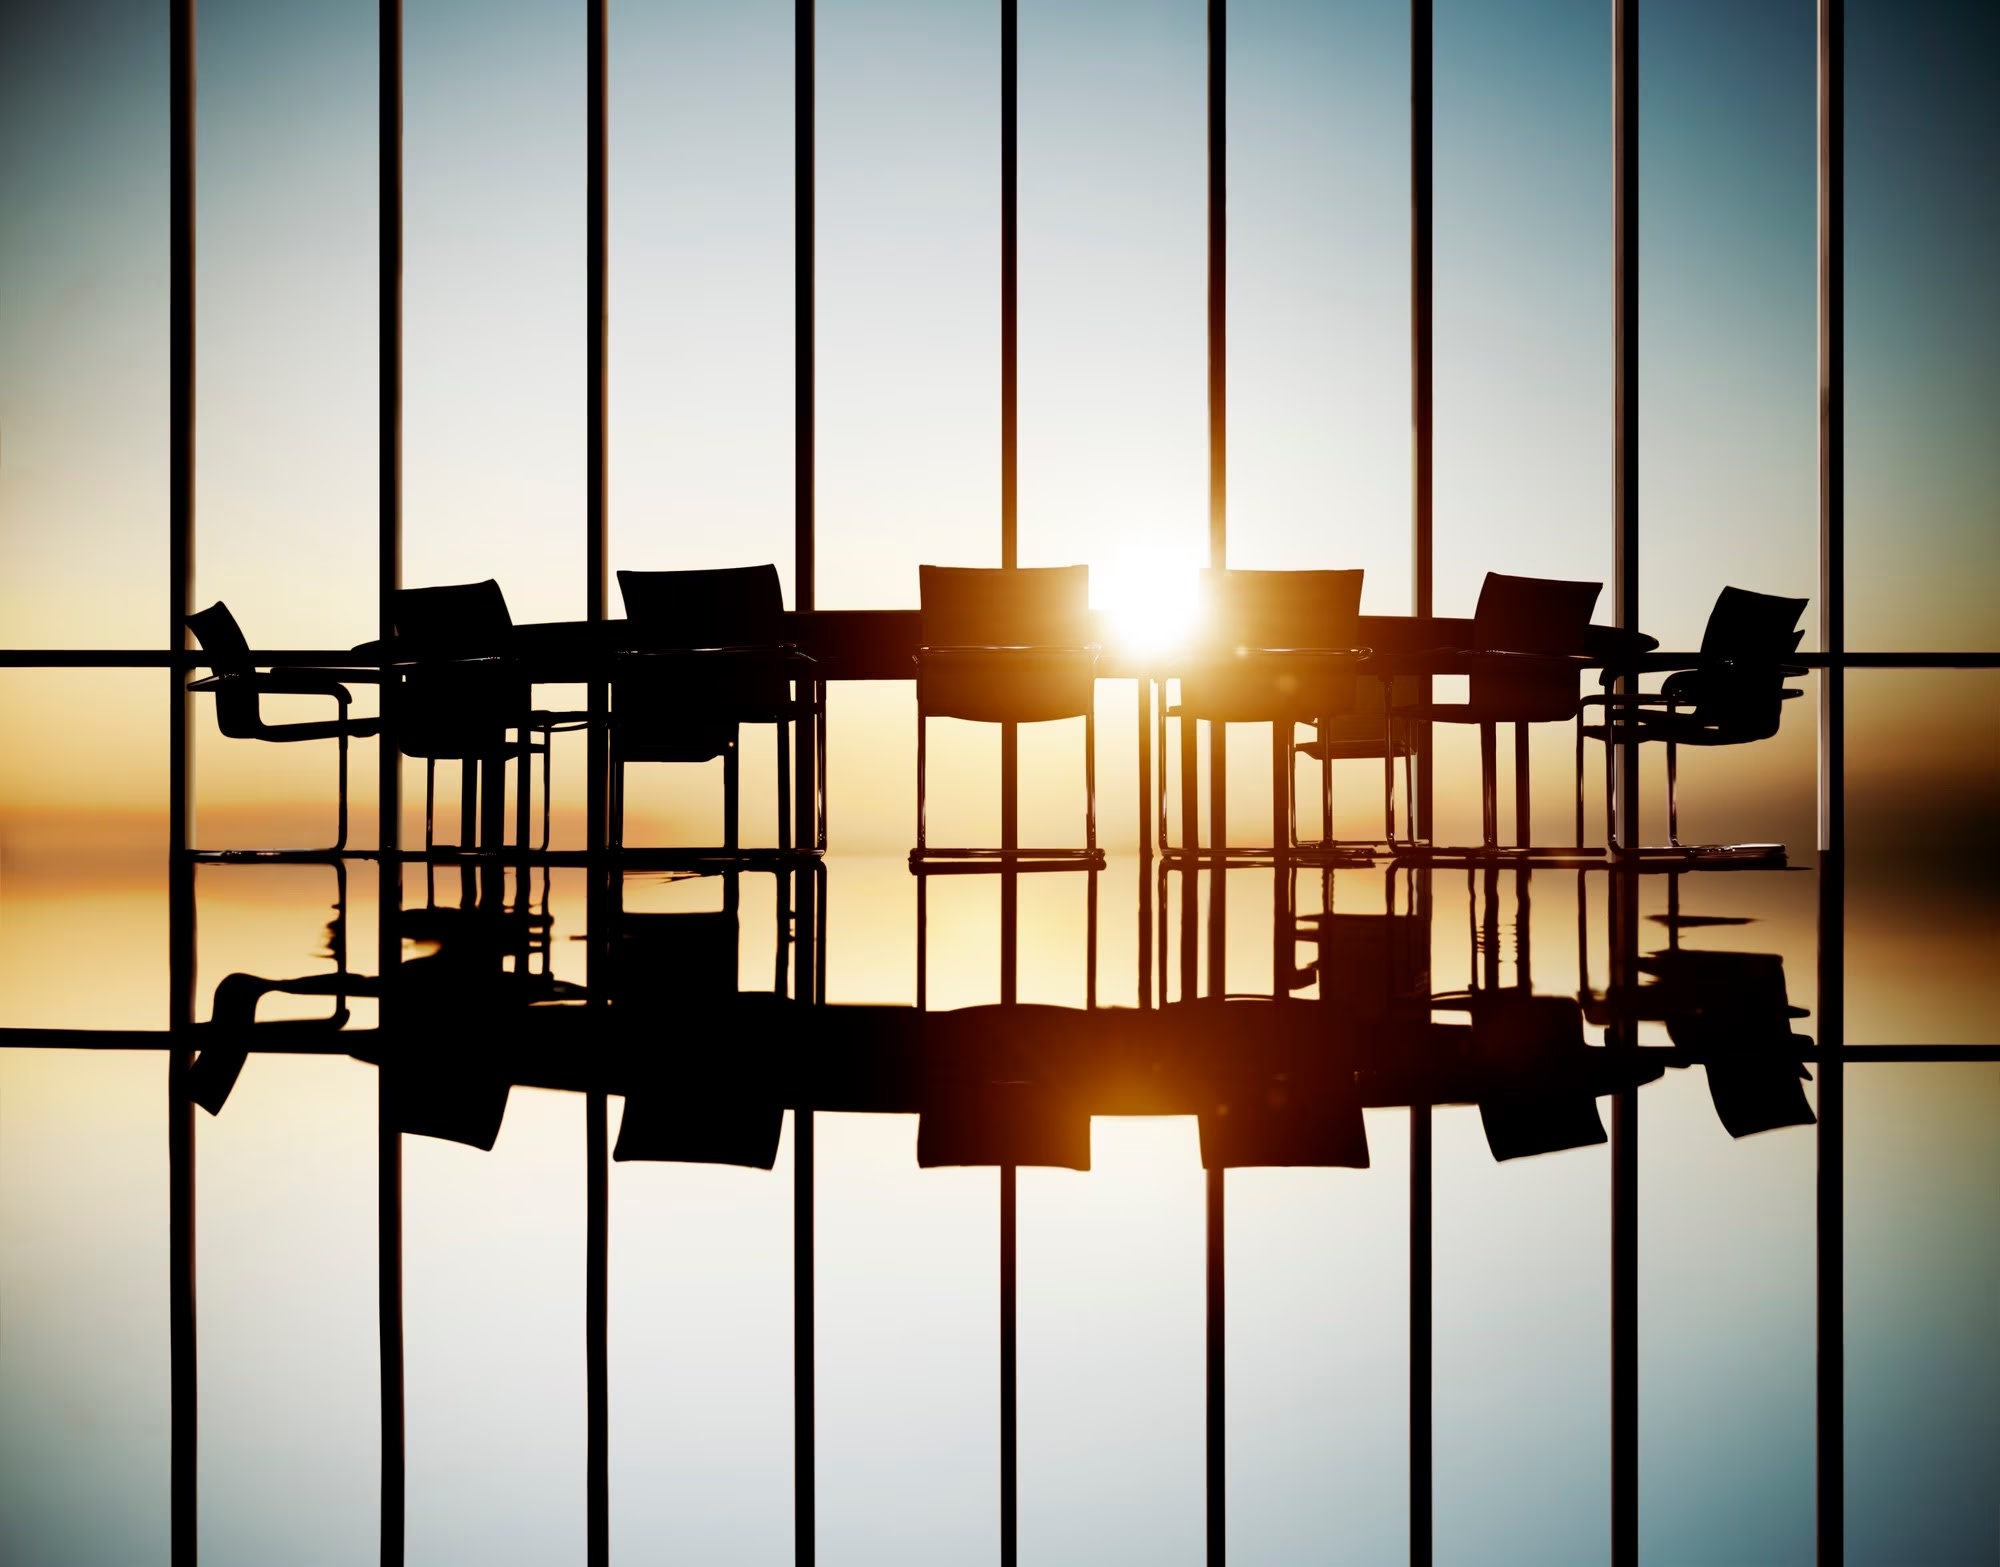 Image of meeting room chairs and table with floor-to-ceiling windows and view of sunset or sunrise